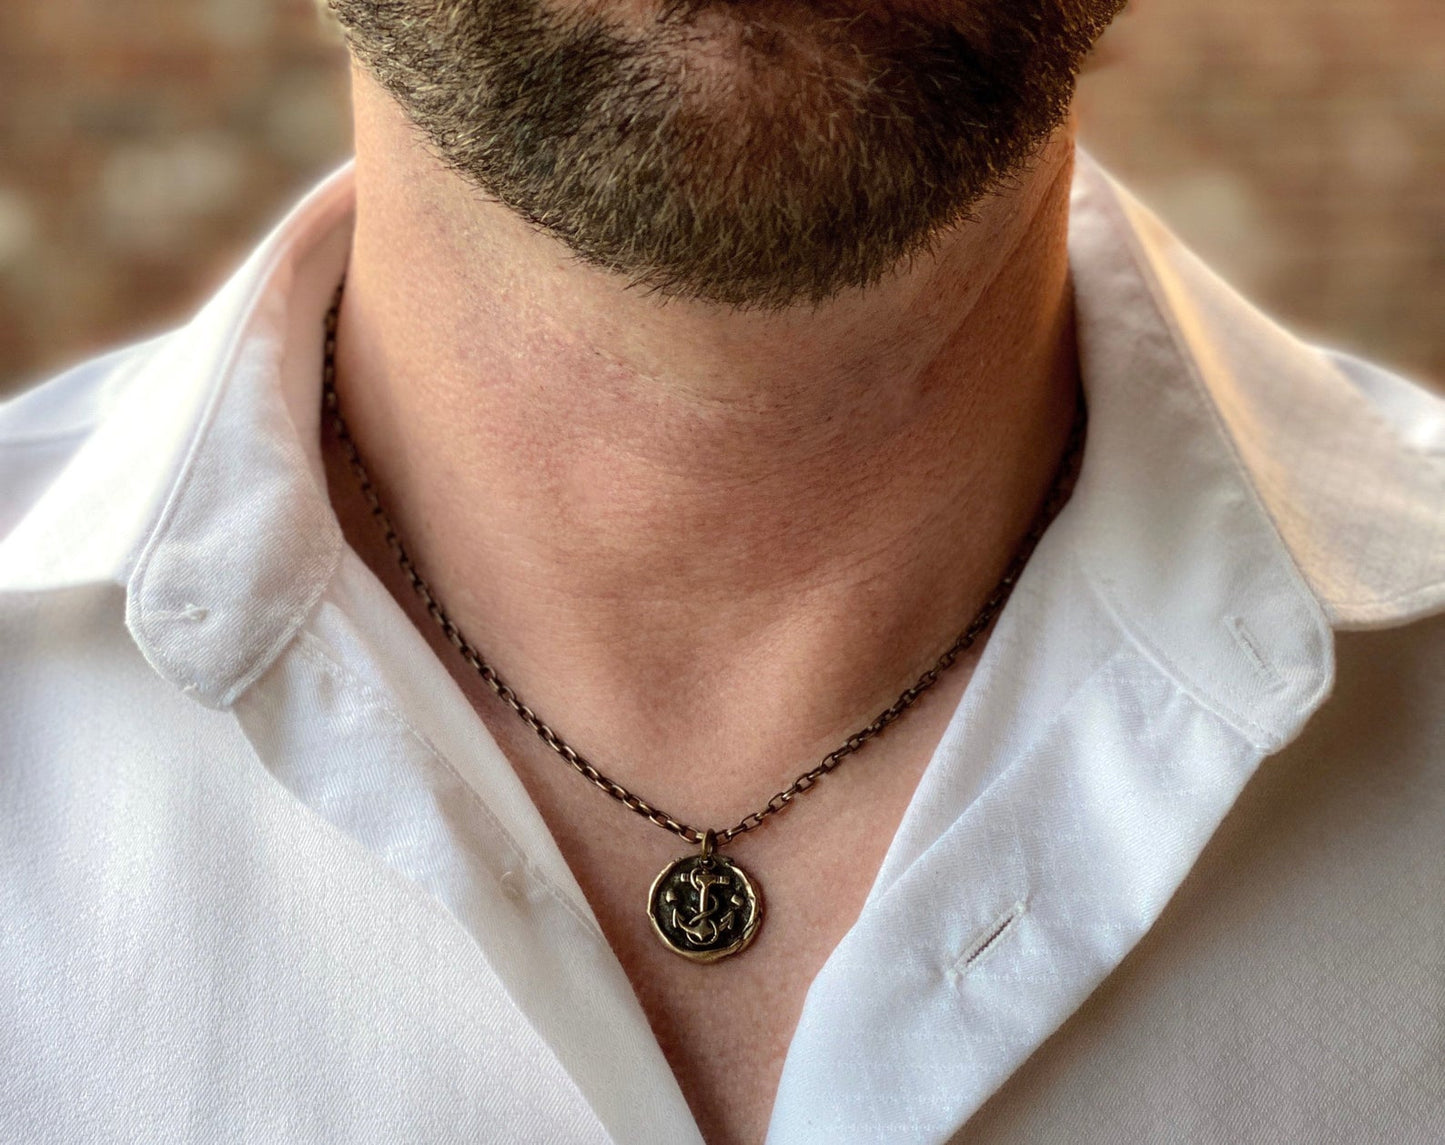 Wax Seal Nautical Anchor Necklace, Brass and Bronze Men's Unisex Ship Sea Jewelry, 20 or 24 Inch Rolo Chain, BR-048